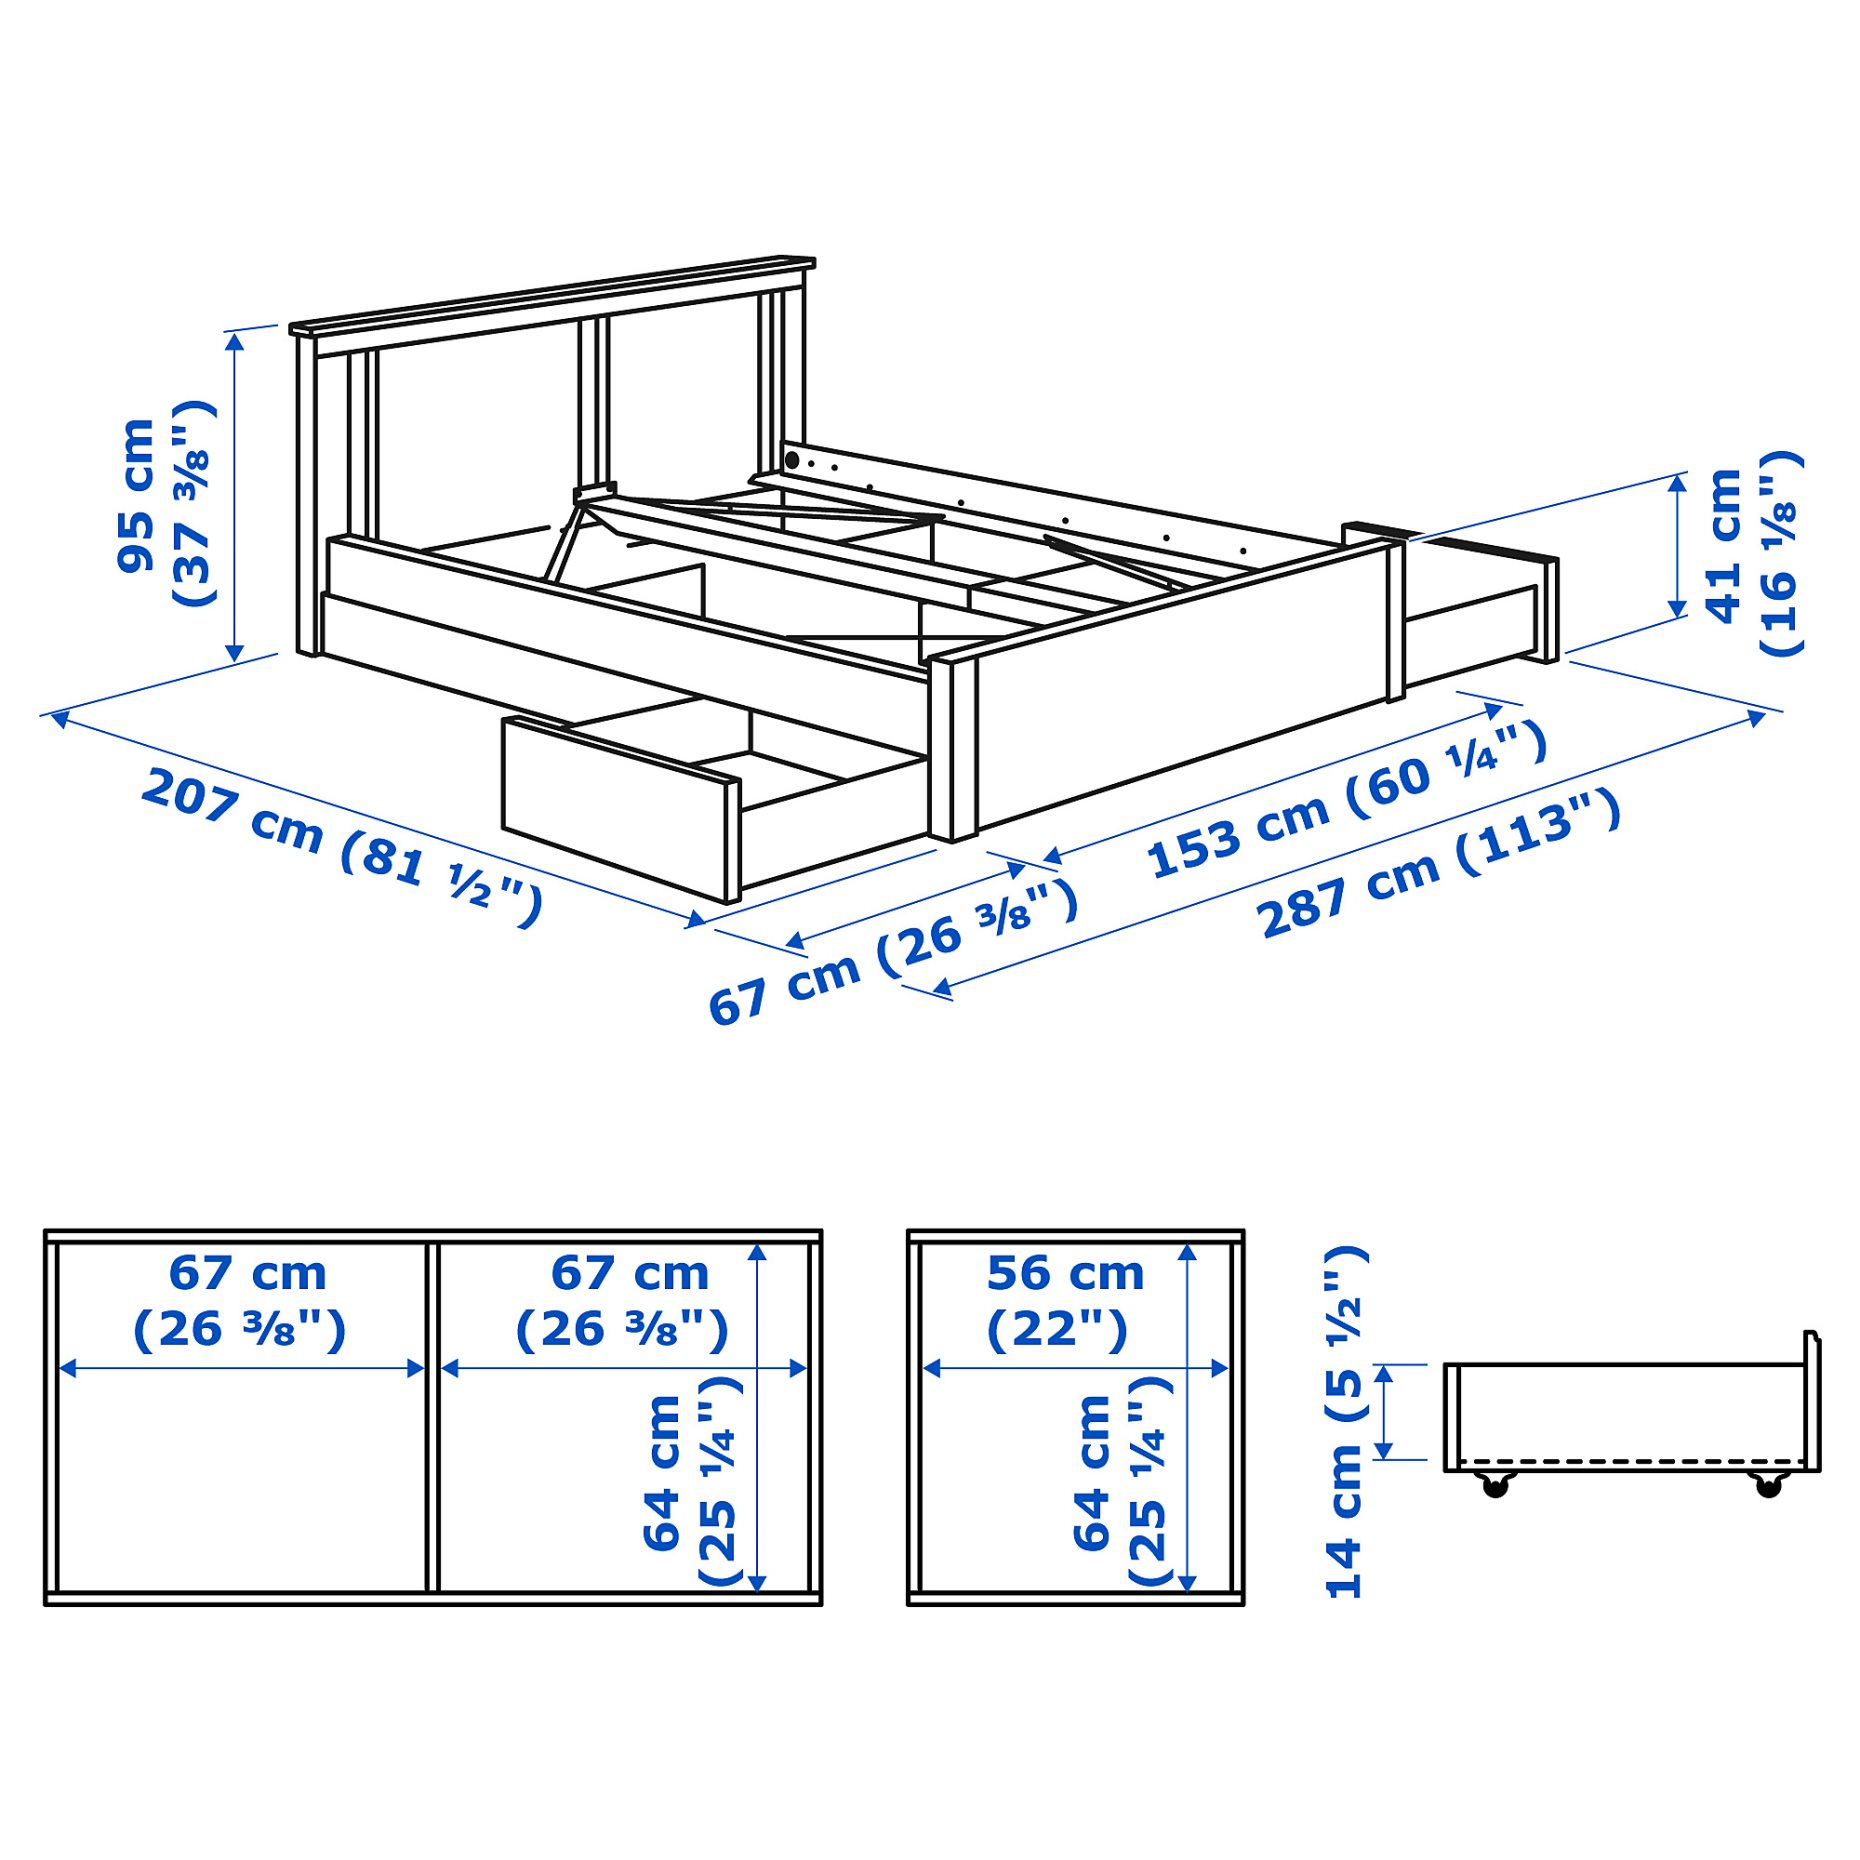 SONGESAND, bed frame with 4 storage boxes, 140X200 cm, 892.411.57